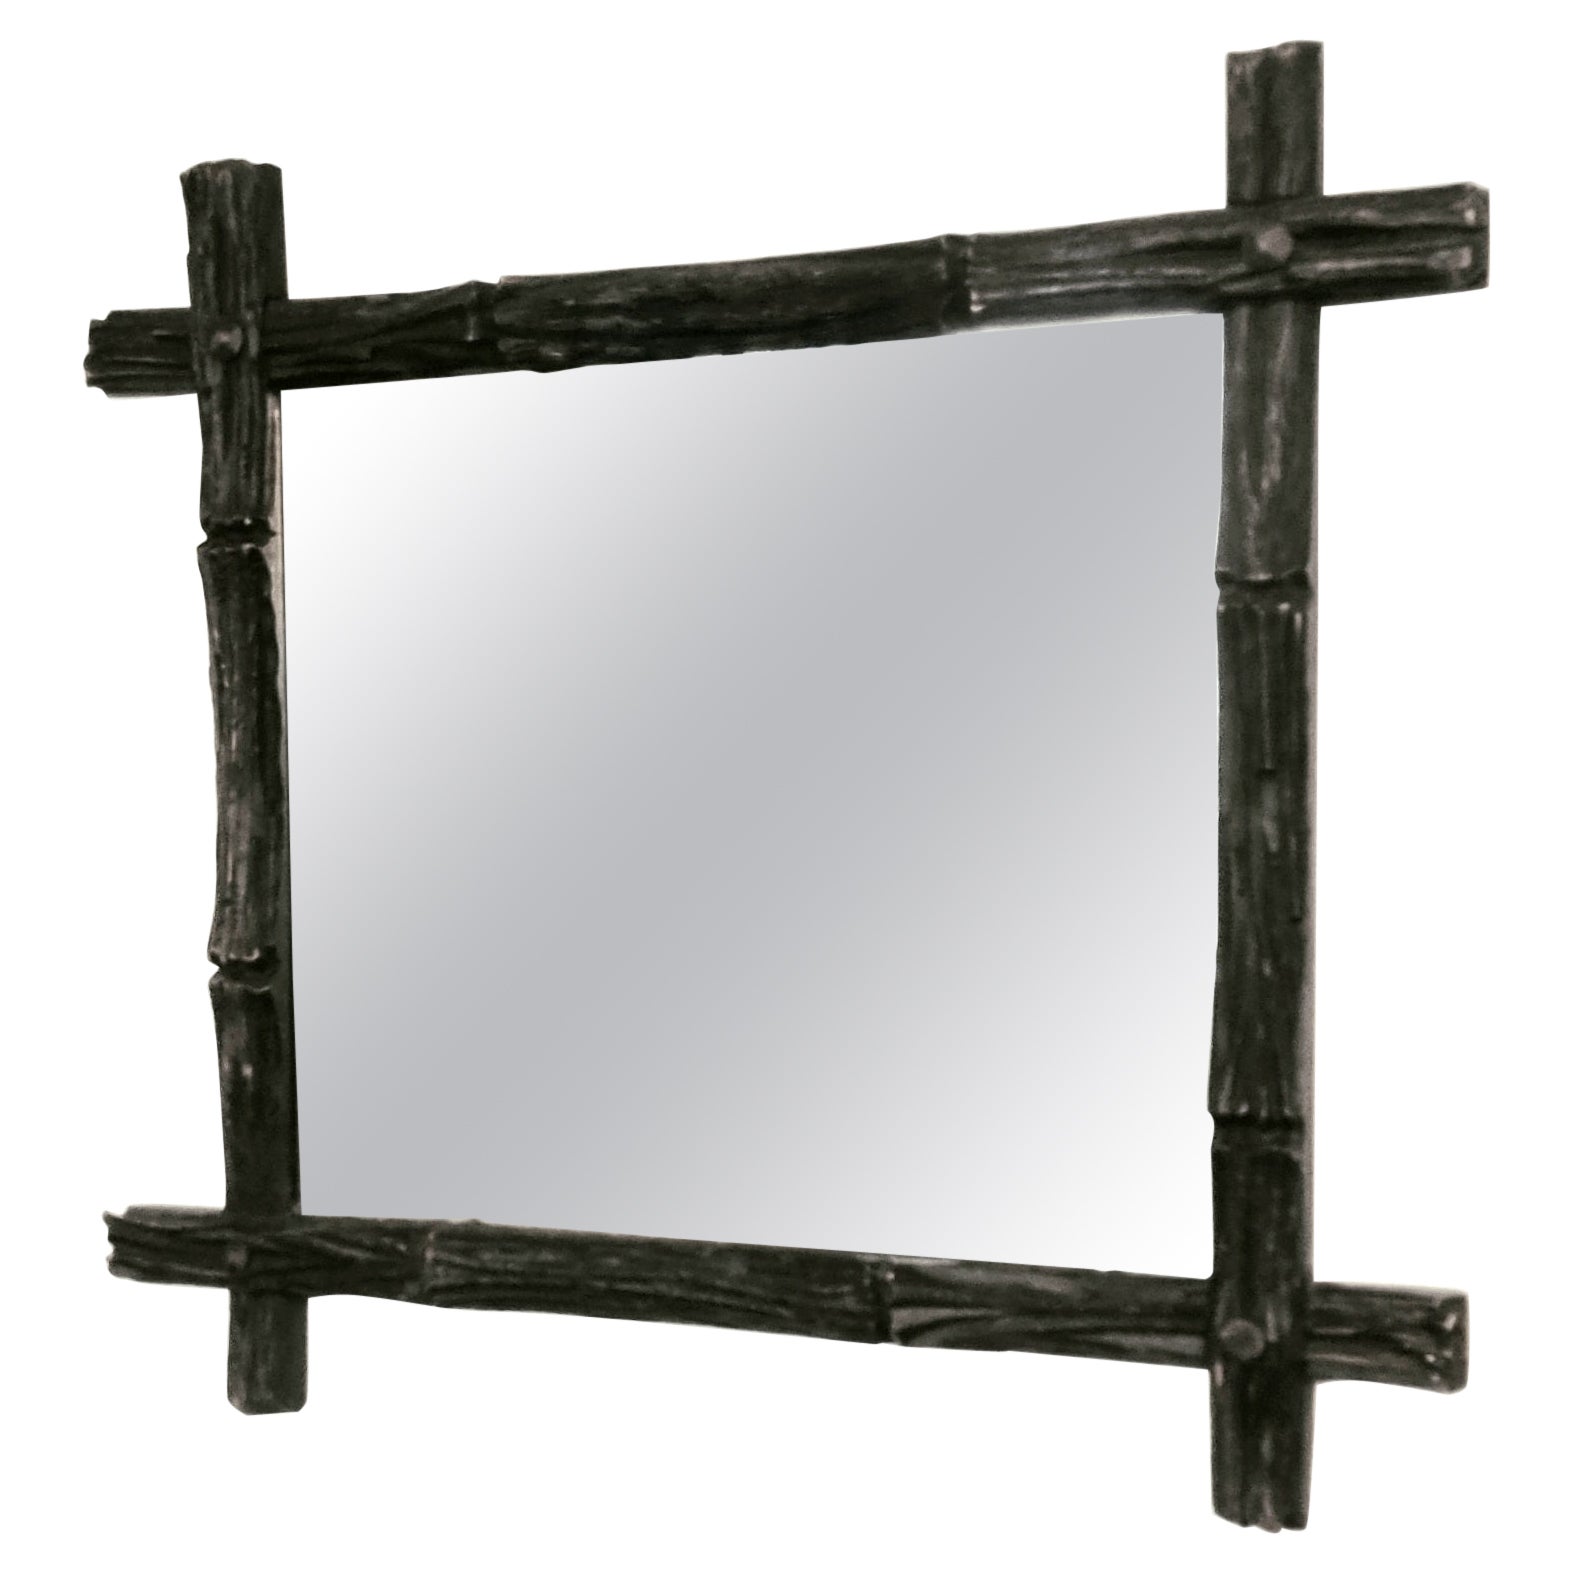 August Bergin & Co. Stockholm, Mirror with Wooden Frame, Swedish Jugend For Sale